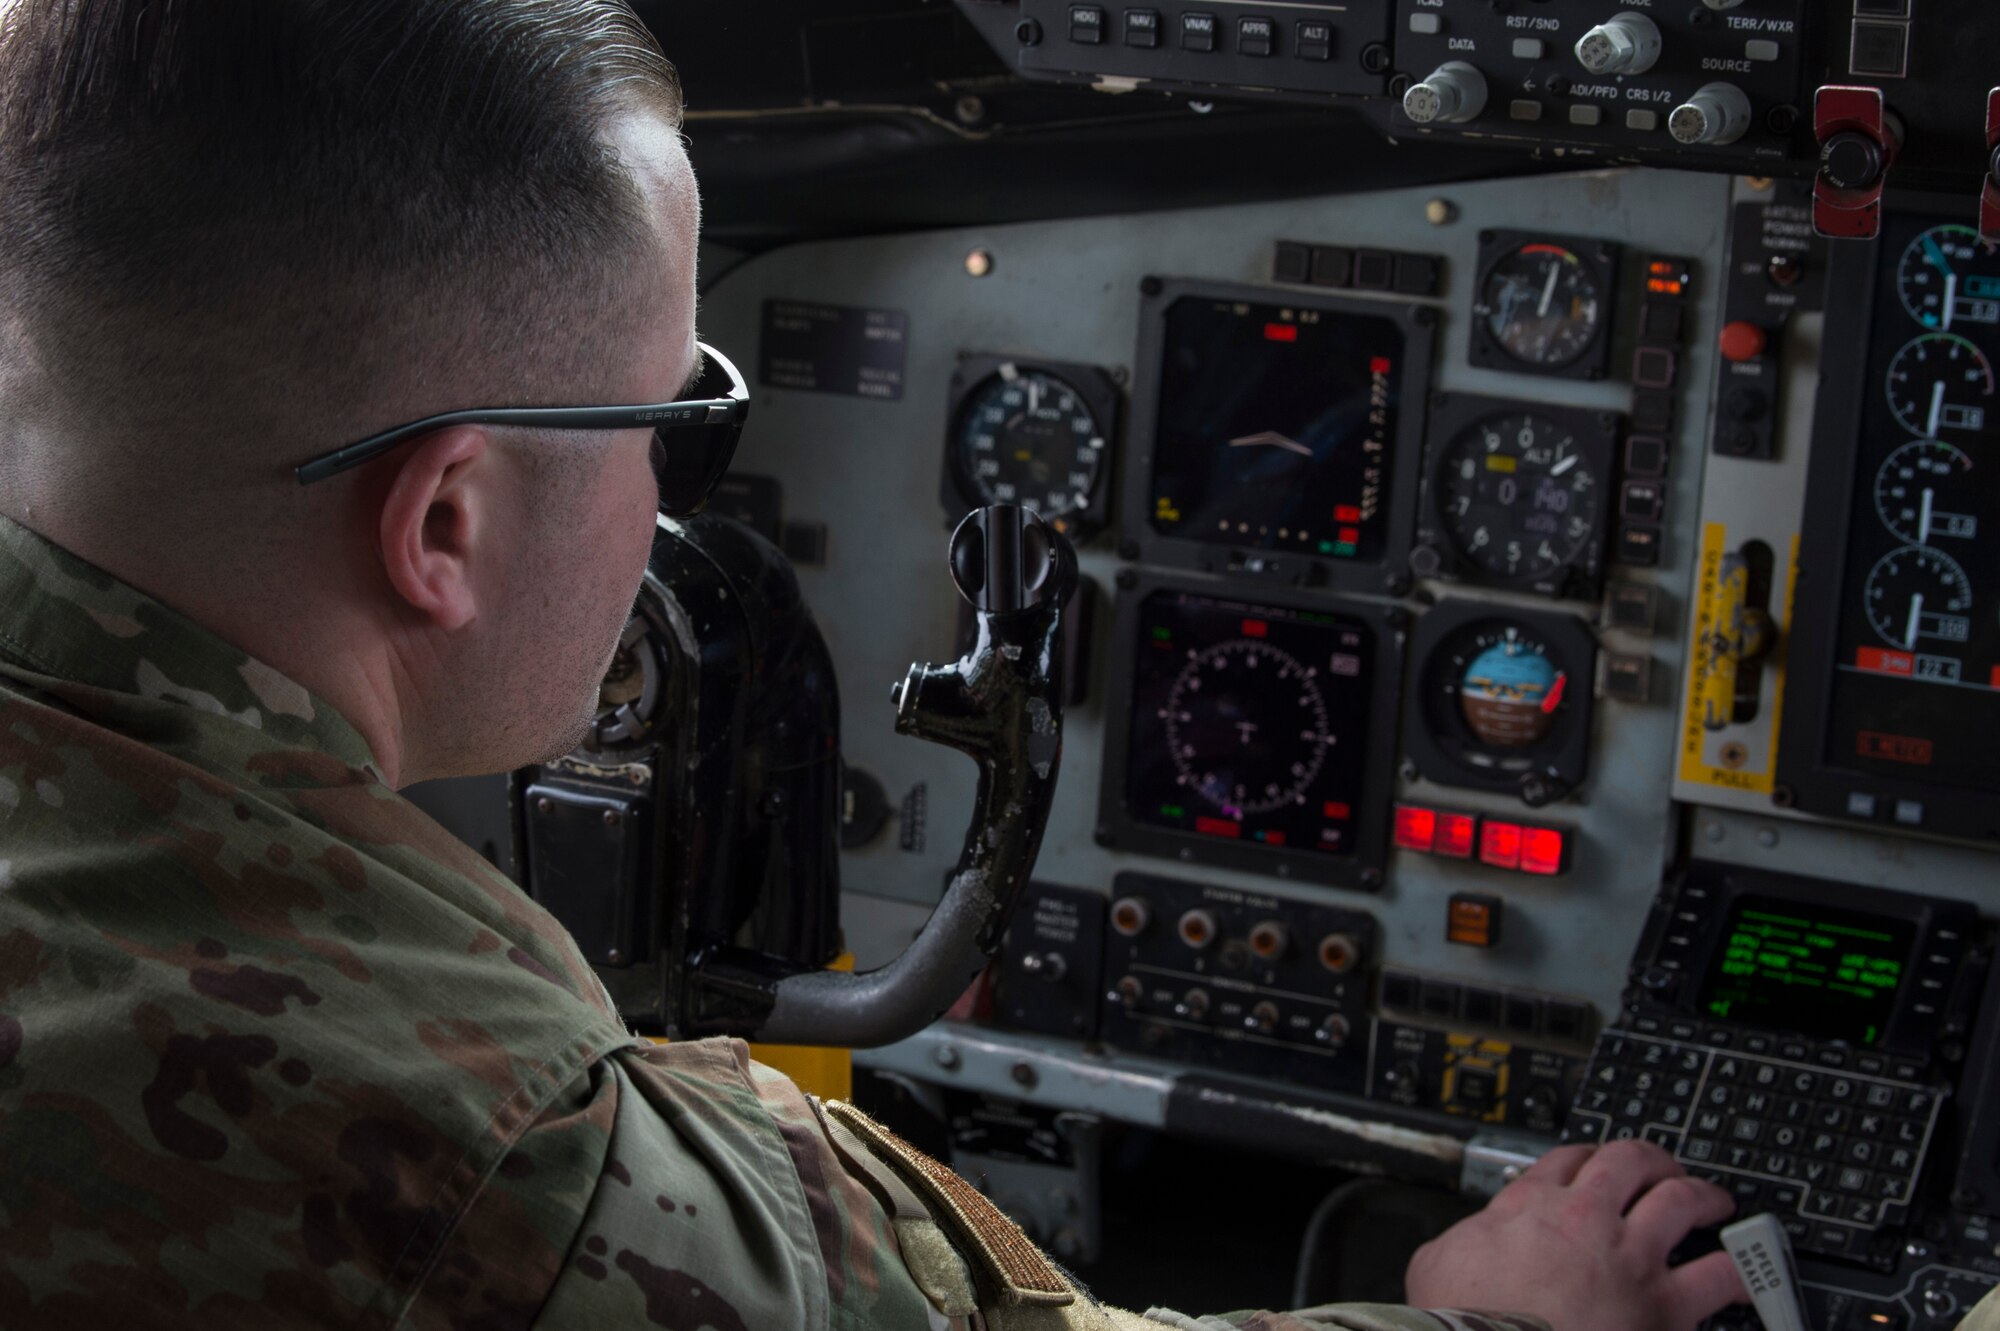 U.S. Air Force Staff Sgt. Robert Argenti, a 6th Aircraft Maintenance Squadron instrument and flight control systems craftsman, inspects the on-board flight control system of a KC-135 Stratotanker, Jan. 23, 2020, at MacDill Air Force Base, Fla. Instrument and flight control systems Airmen inspect, and repair malfunctions in avionics, radar, recording and video display systems.